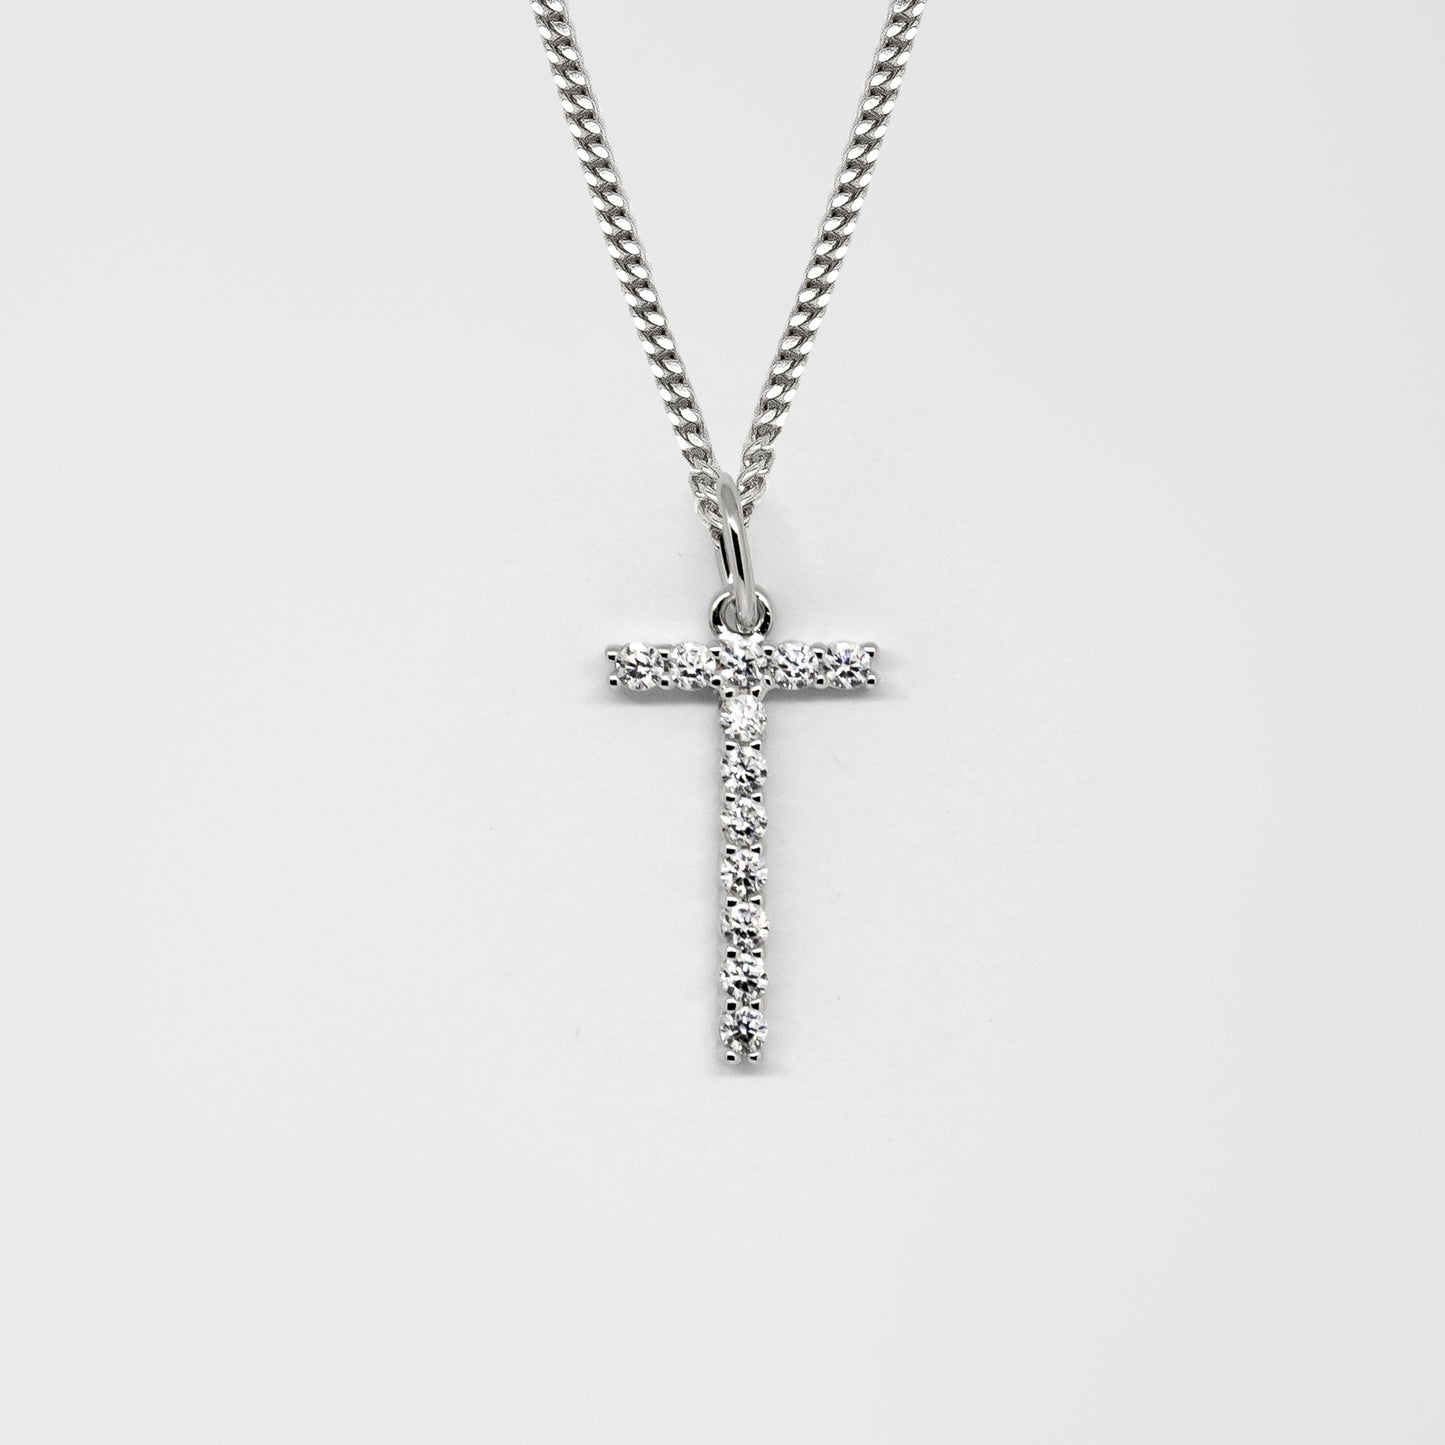 Silver 925 Initial Necklace - T